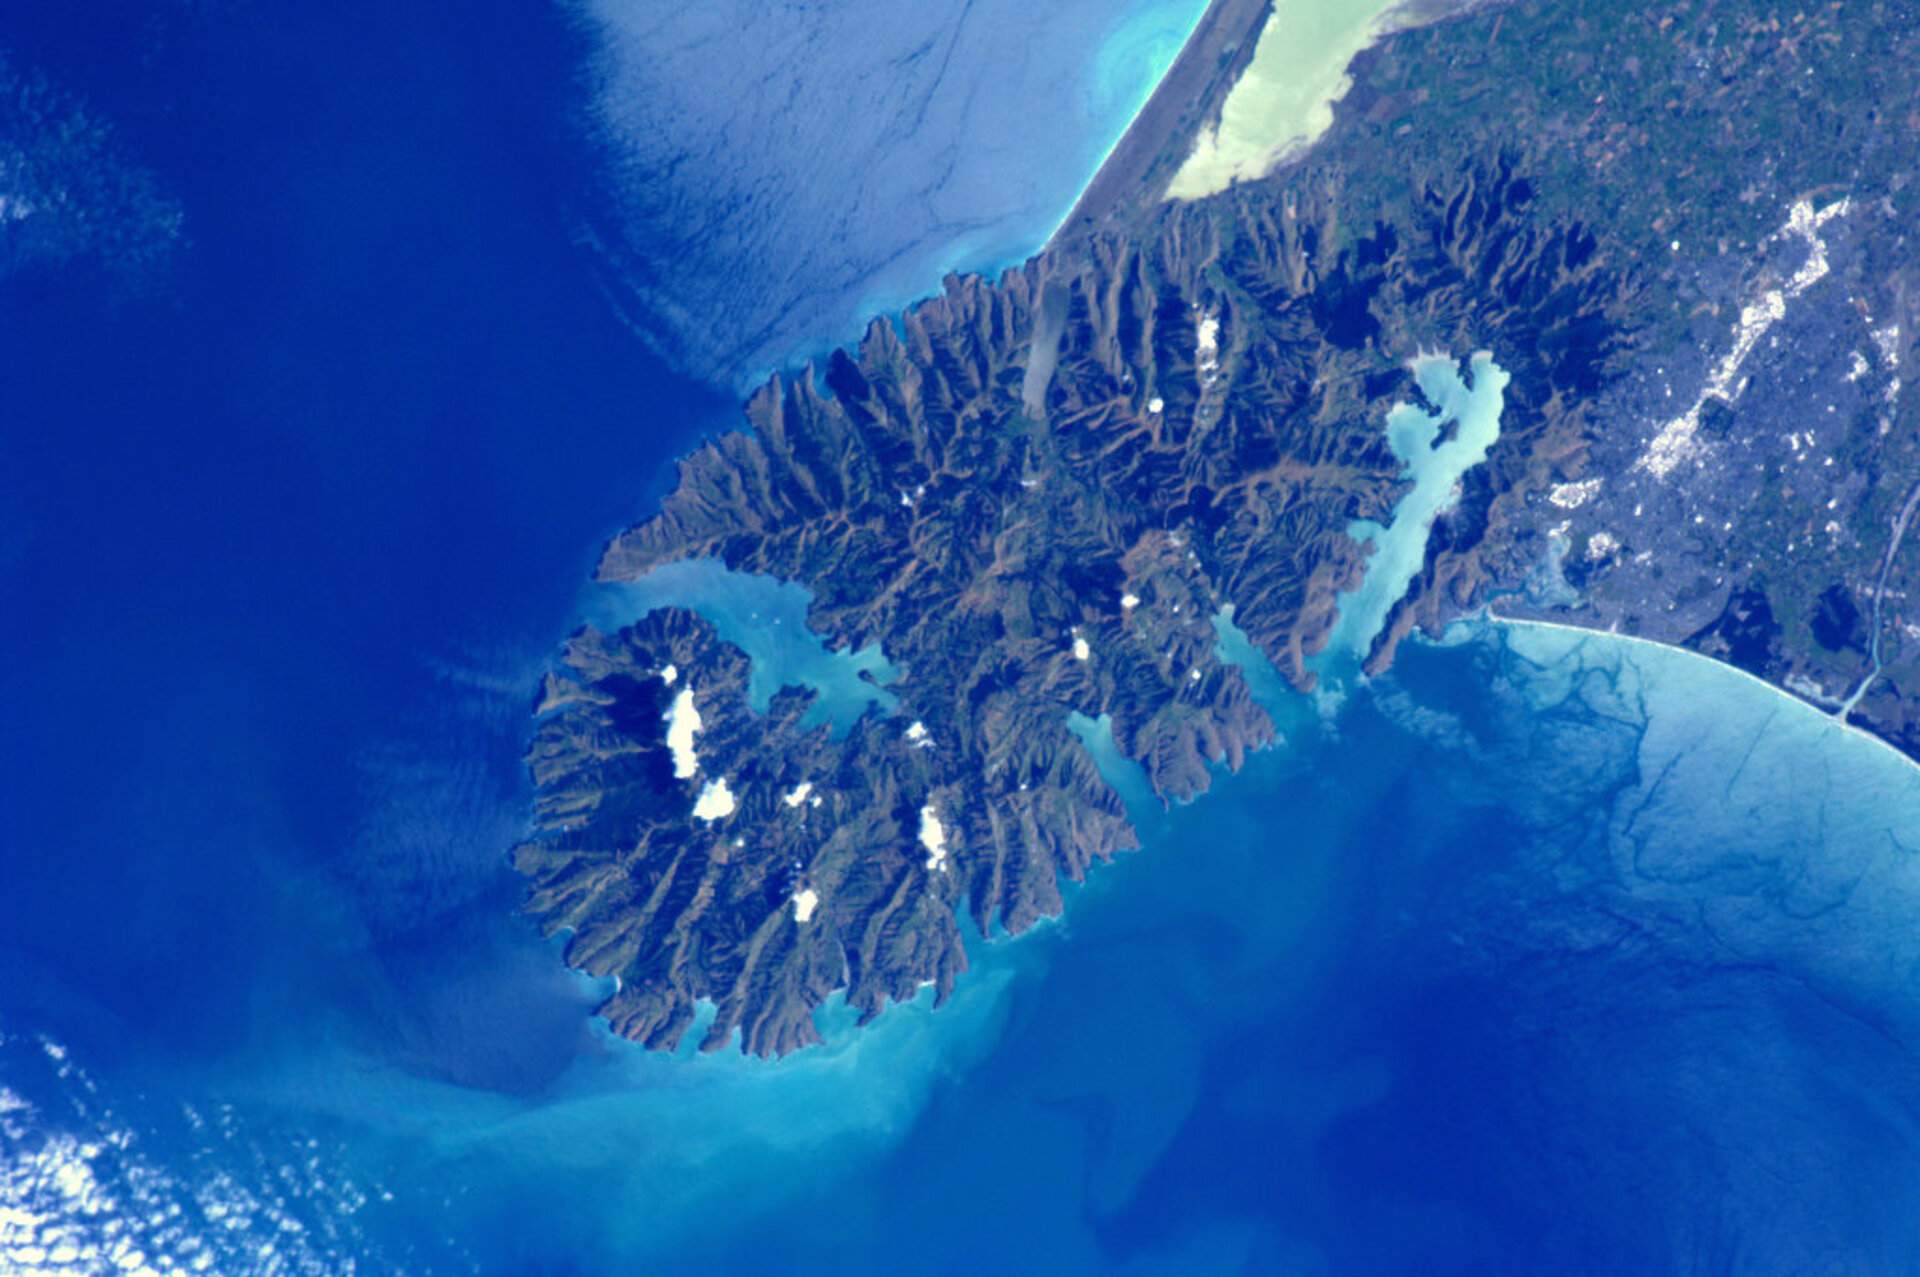 Christchurch, New Zealand, as seen from the ISS